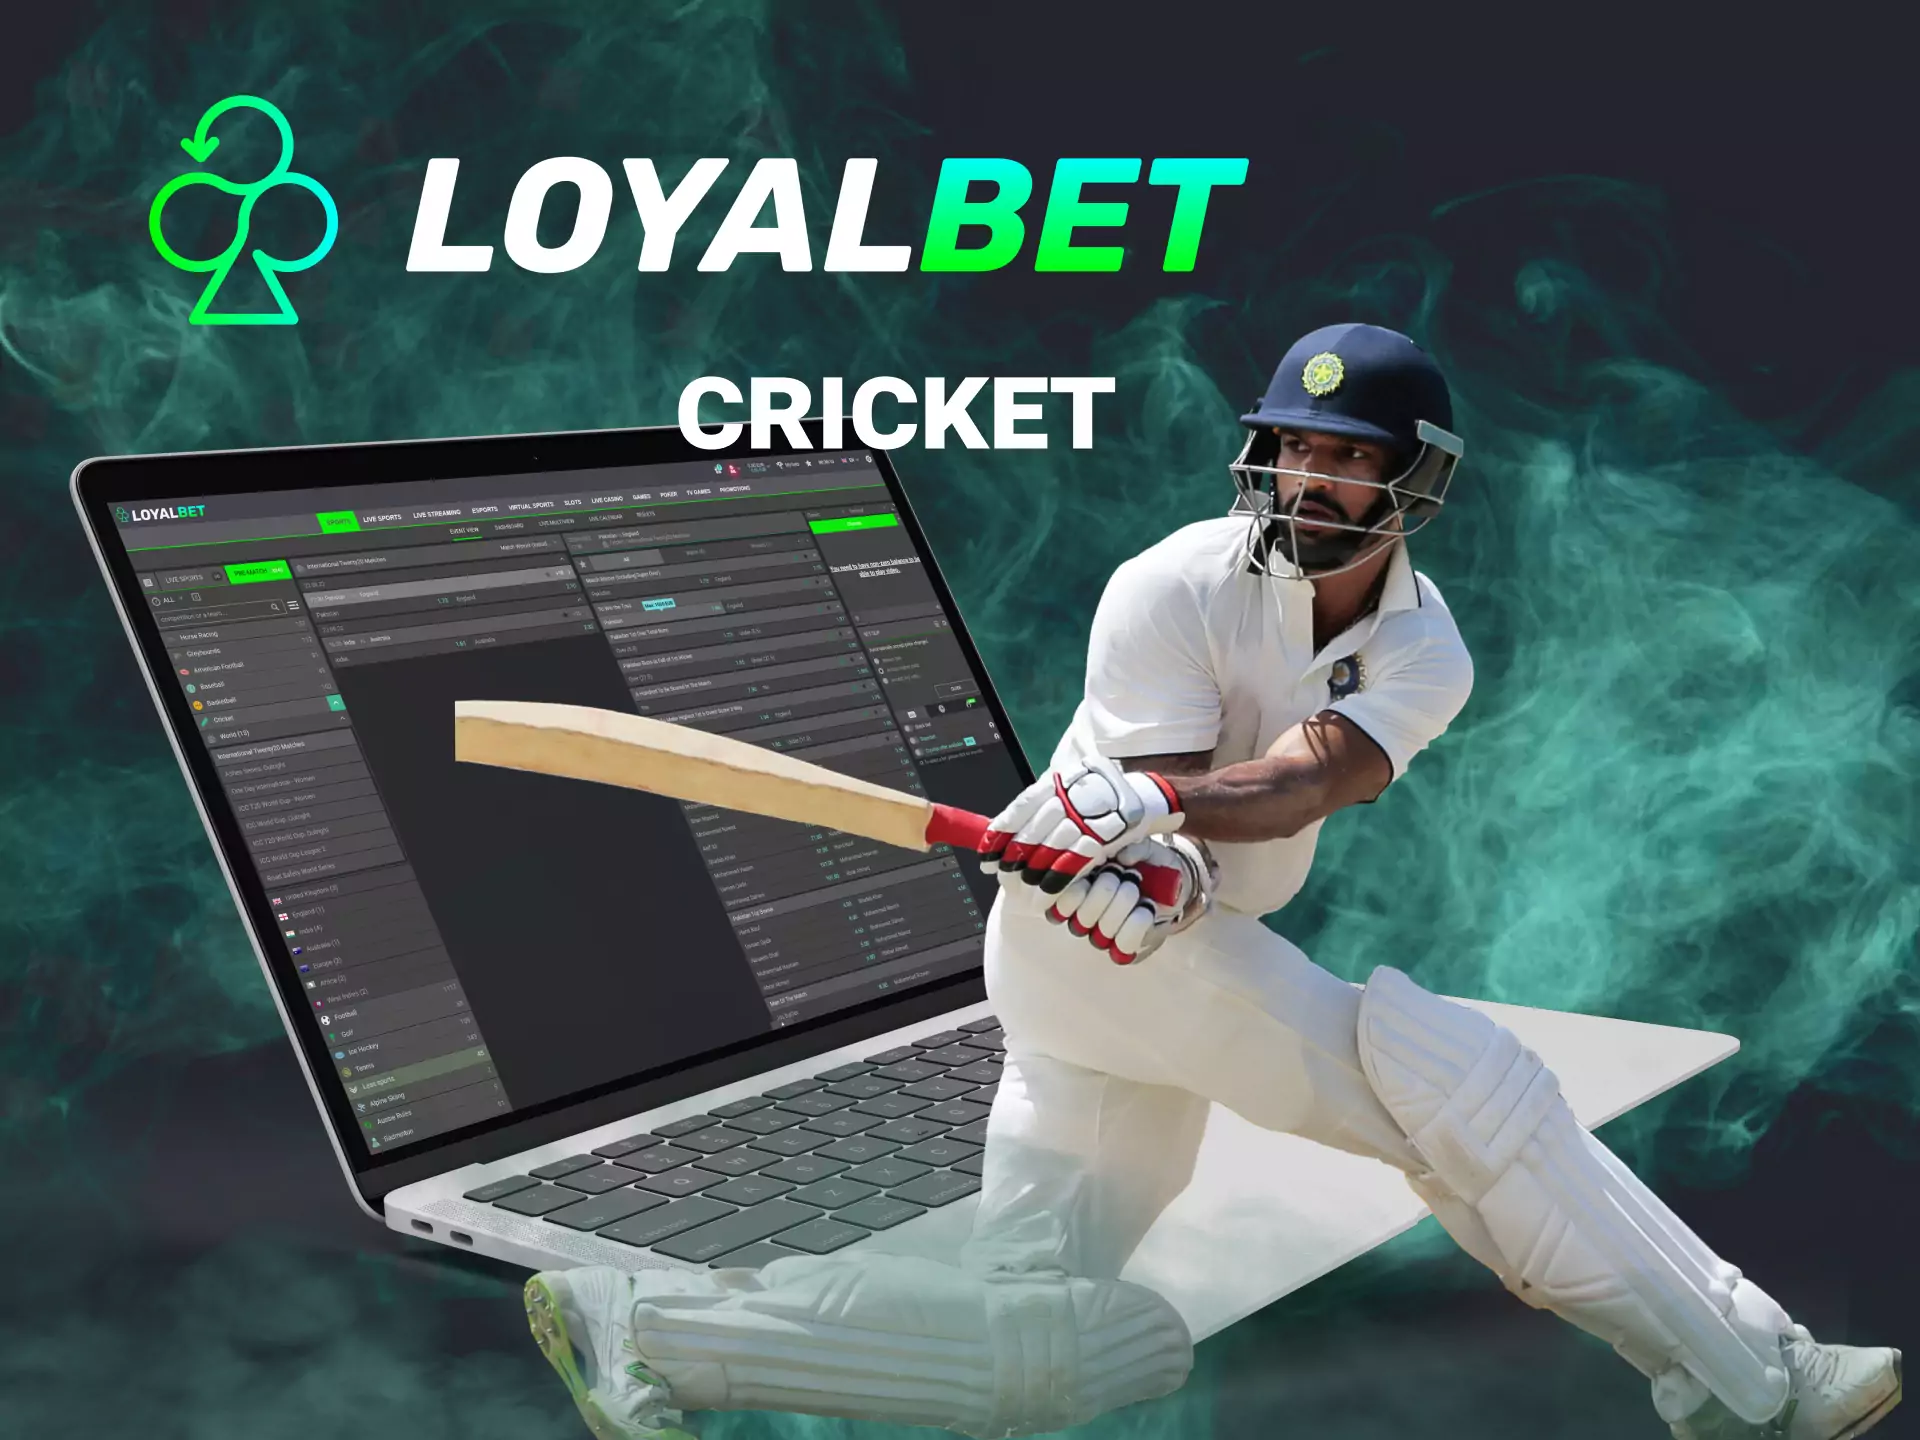 Cricket betting is the most popular entertainment among Indian users of the Loyalbet website.